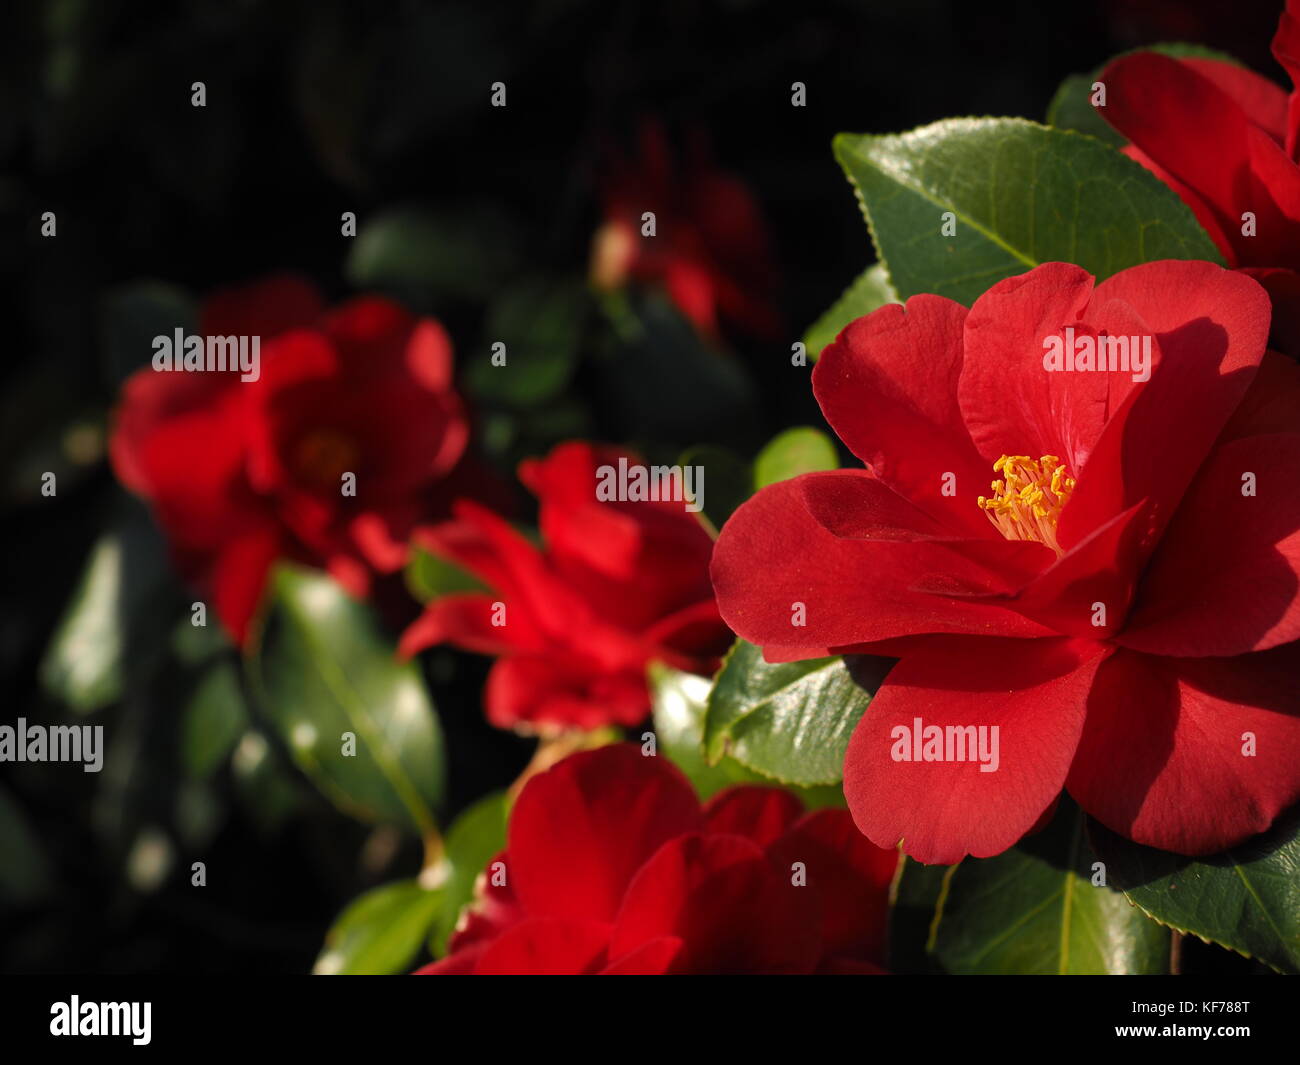 Red, crimson camellia flowers and blooms. Stock Photo